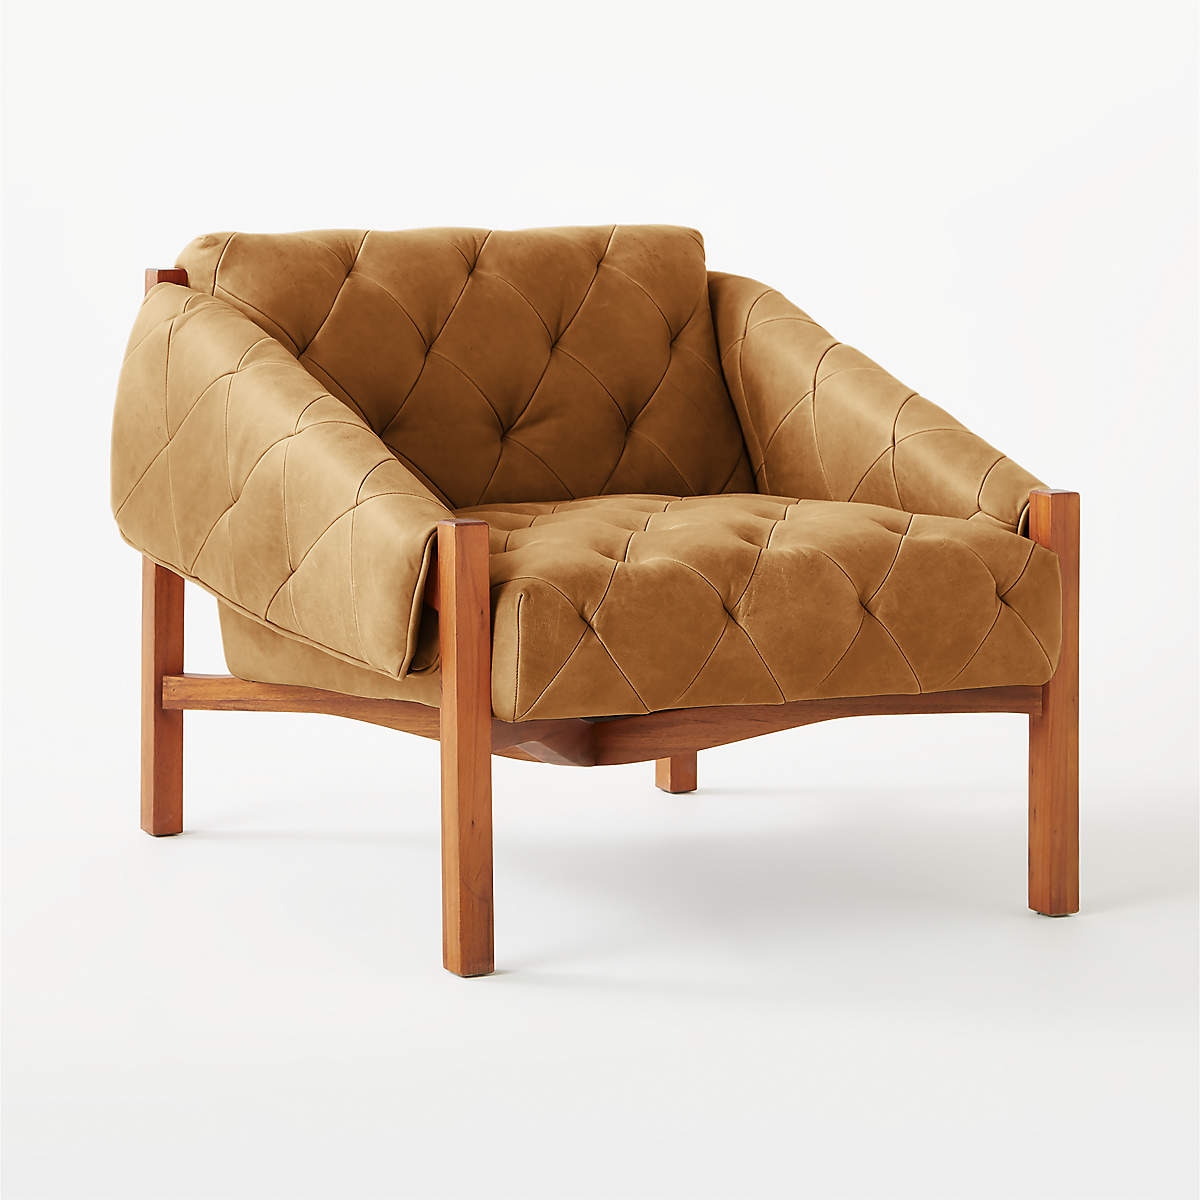 Abruzzo Brown Leather Tufted Chair - Image 1